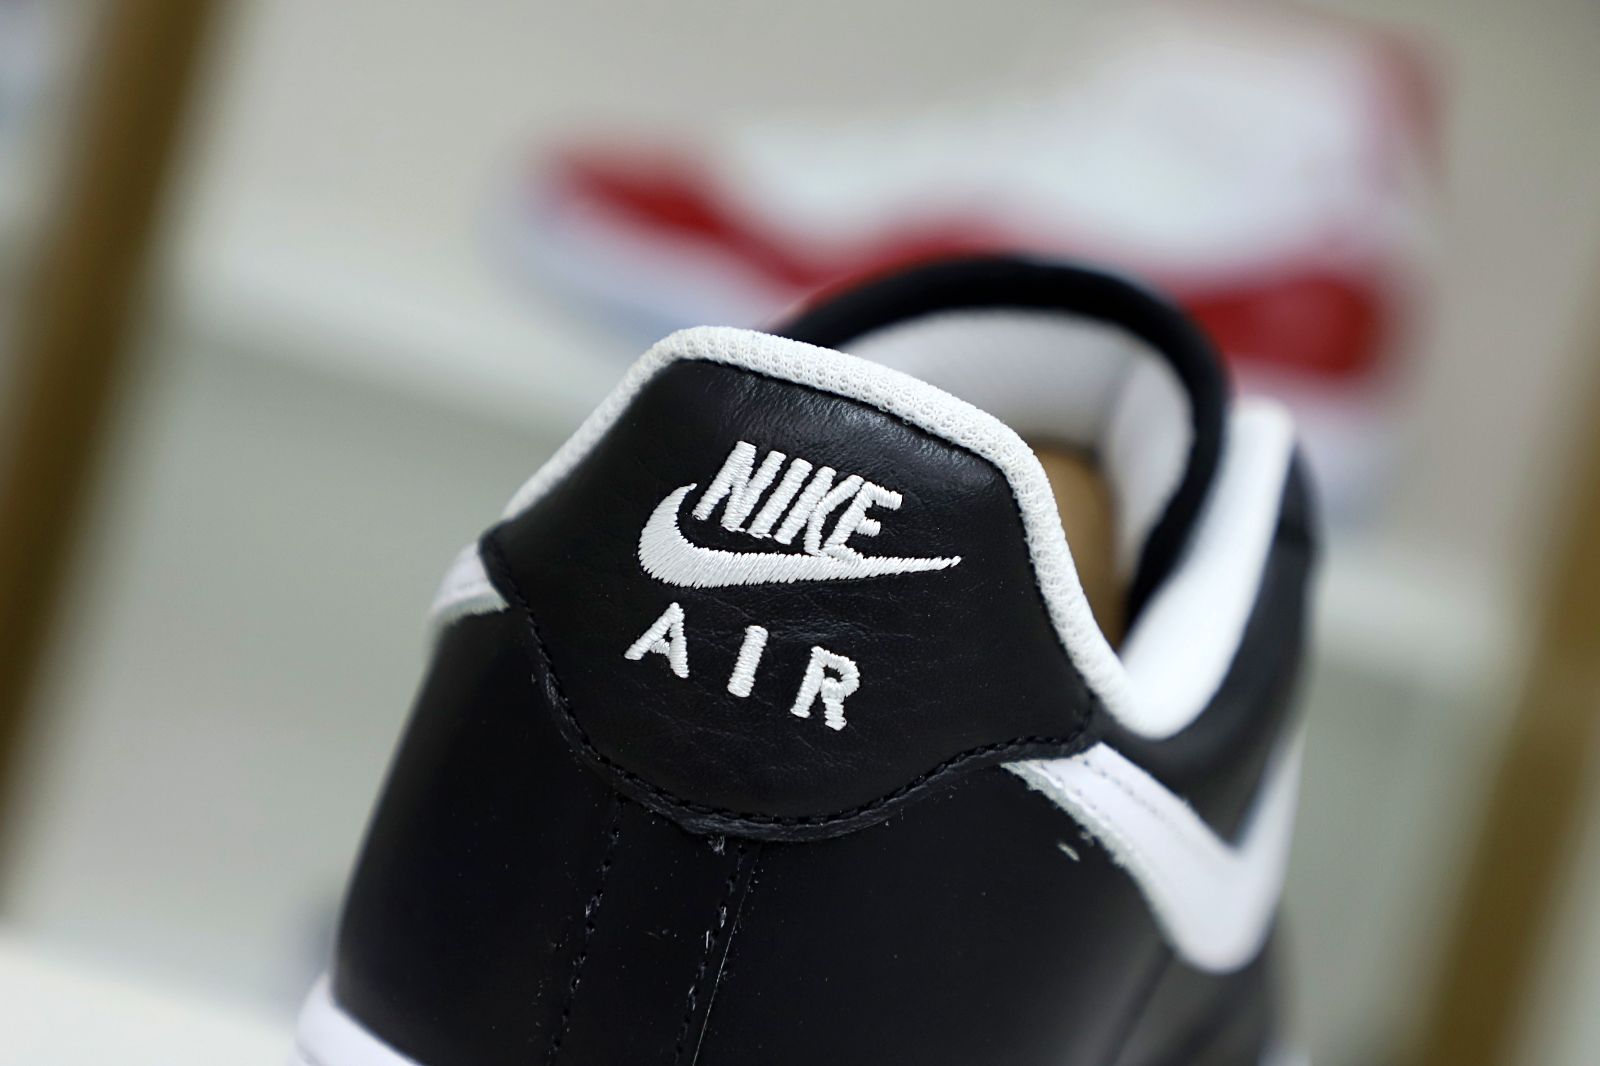 Nike Air Force 1 Low PMO